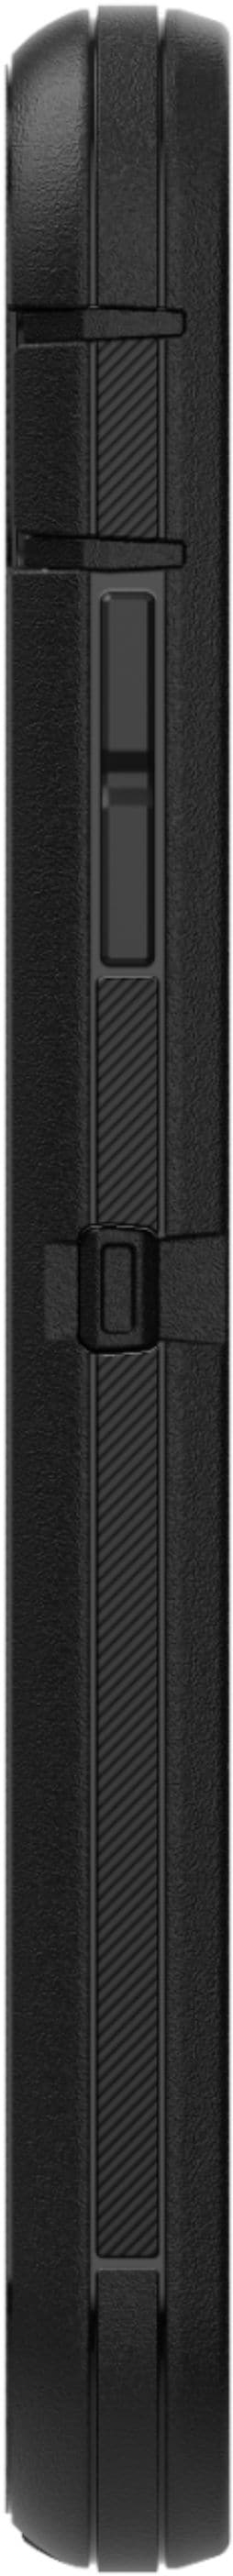 OtterBox - Defender Pro Series Case for Apple® iPhone® 11 Pro Max/Xs Max - Black_10